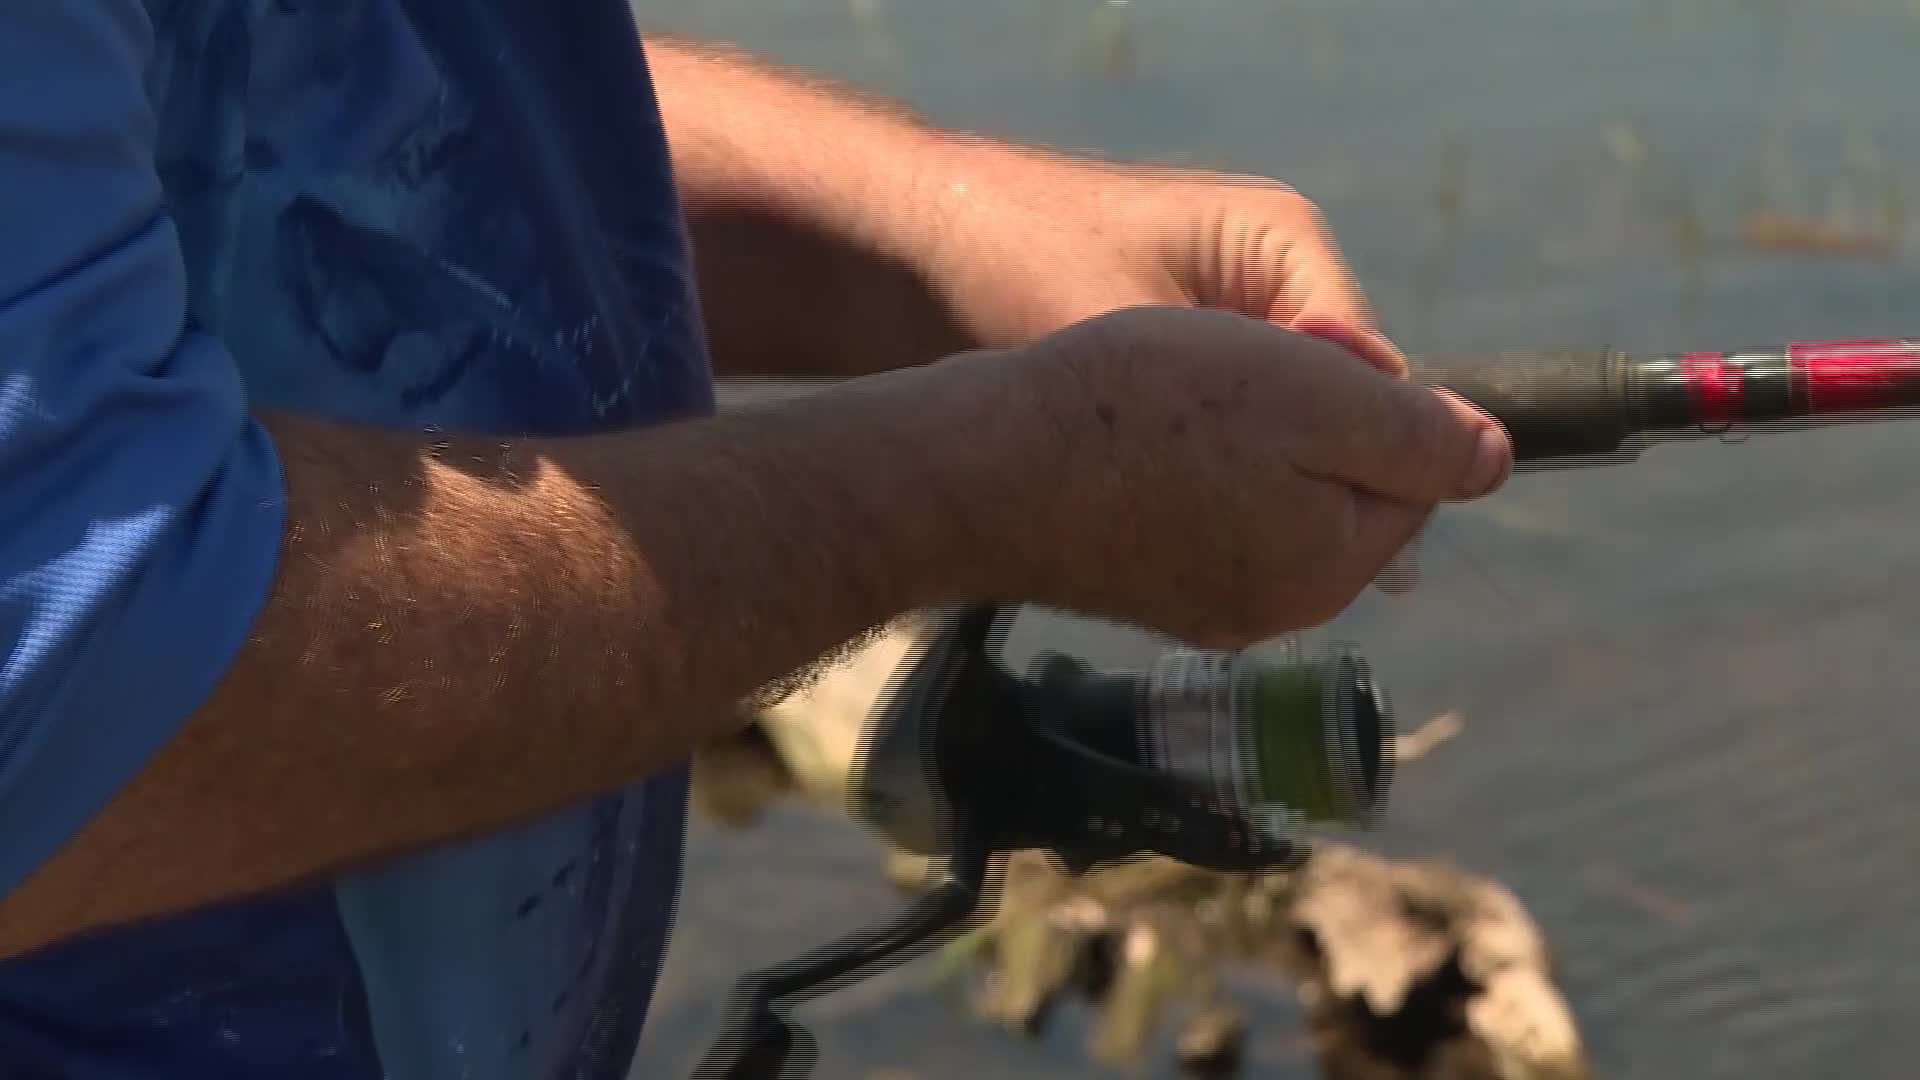 ANGLERS WARNED FOLLOWING SPIKE IN FISHING-RELATED FINES – NBN News